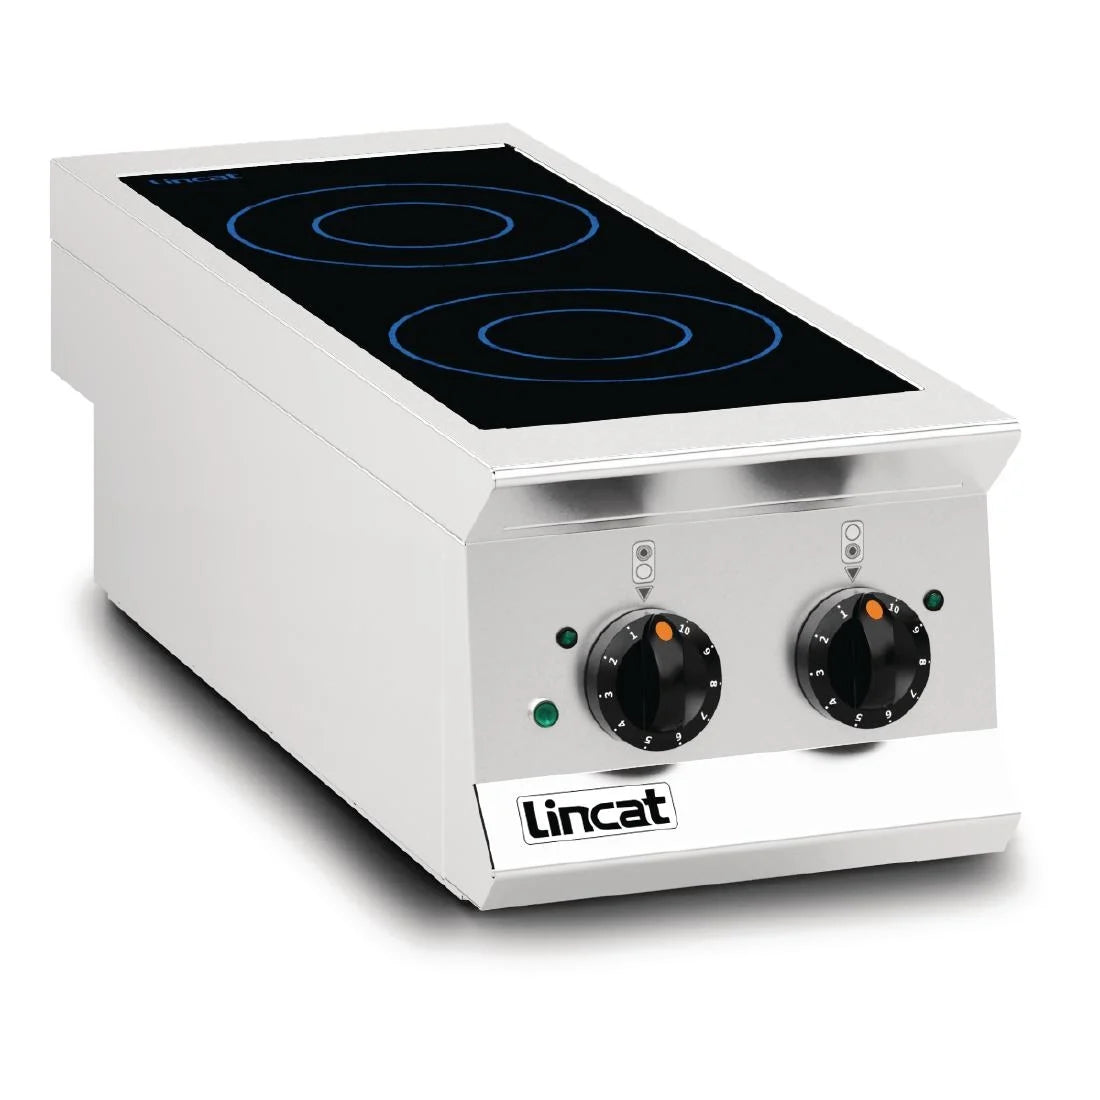 Lincat Opus 800 Twin Induction Hob OE8013.Product Ref:00712.Model: DM516. 🚚 3-5 Days Delivery